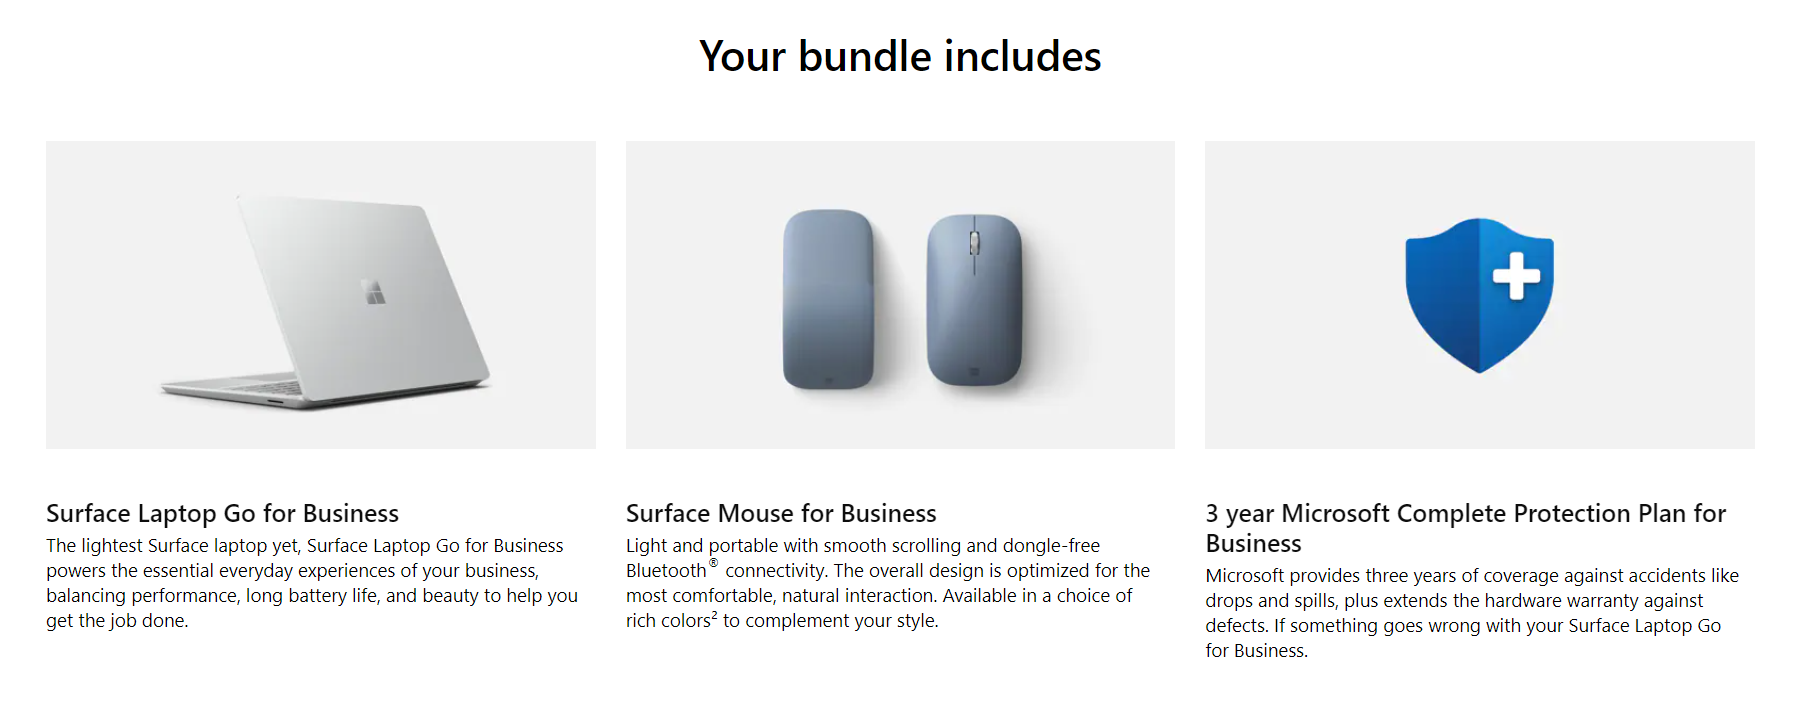 Microsoft Surface as a Service is a customizable bundle subscription